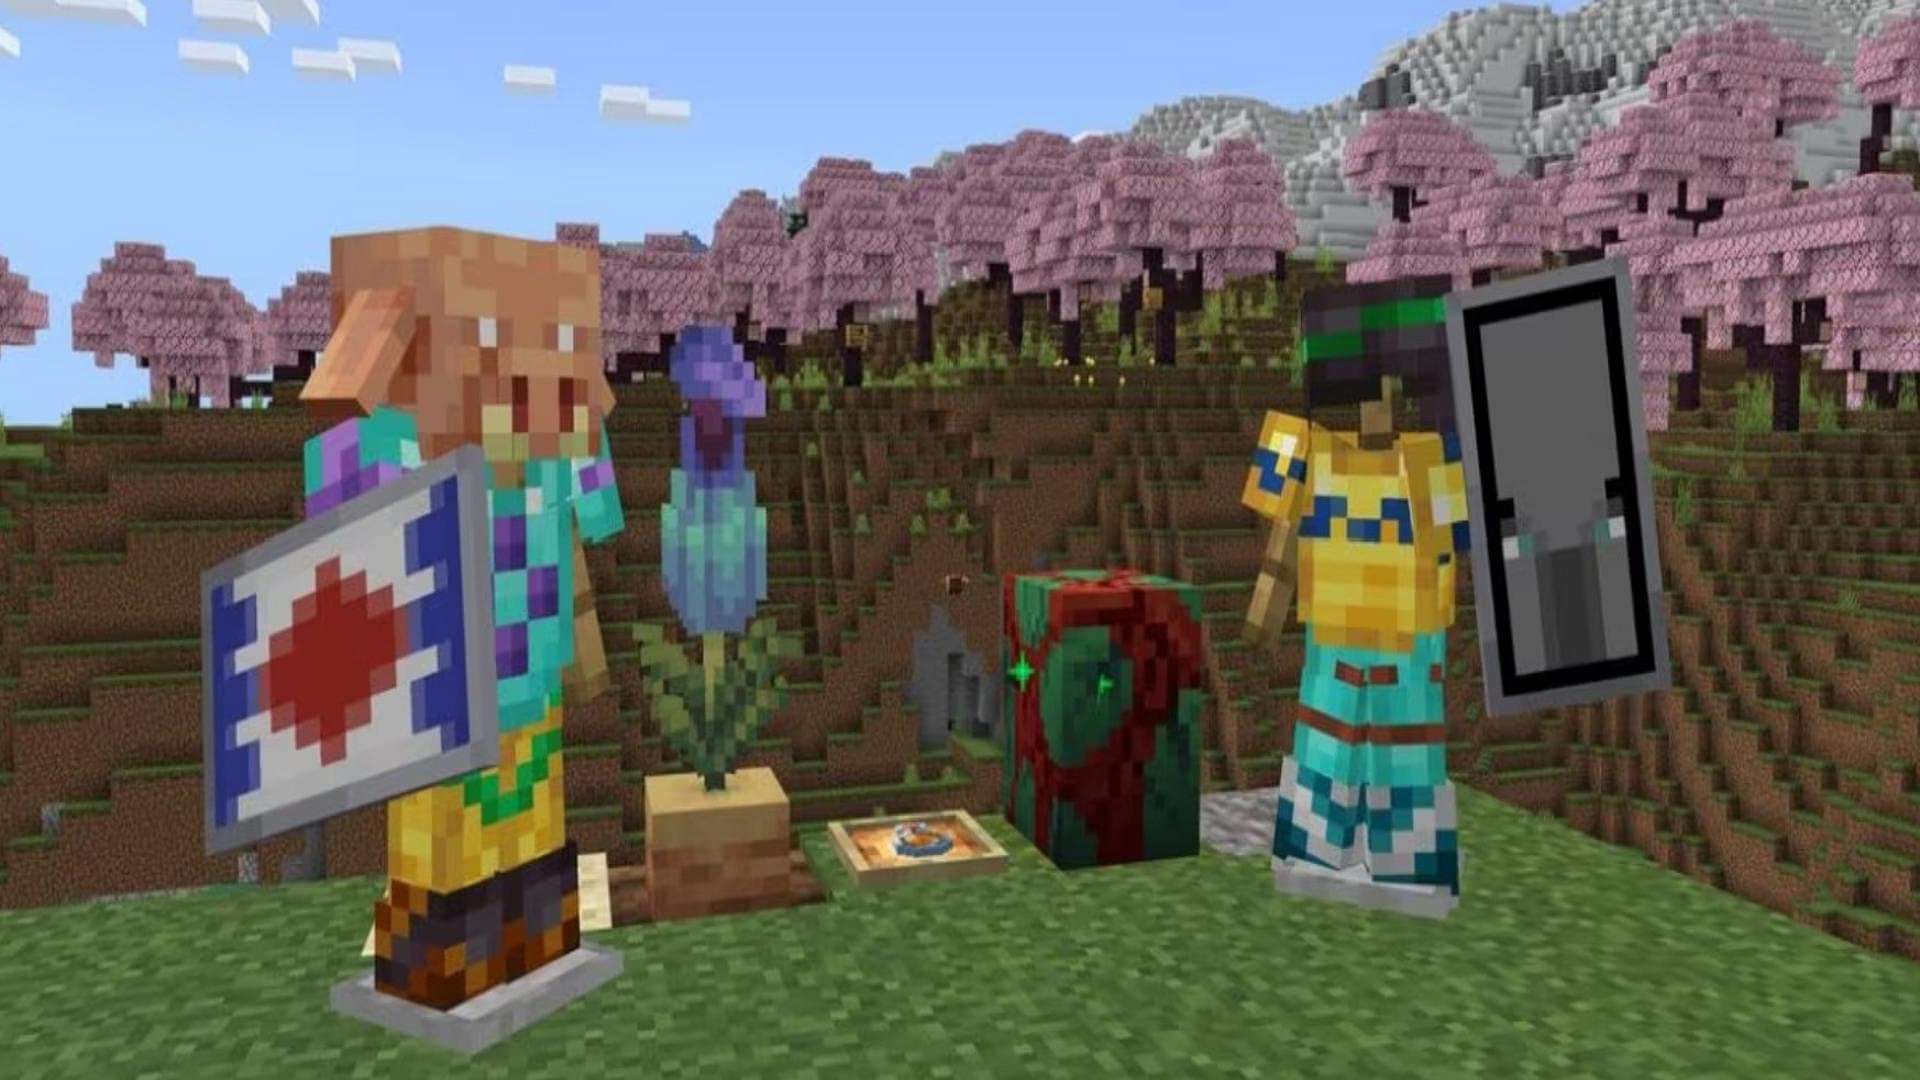 A Guide to Download Minecraft 1.9 Wild Update on PlayStation, Xbox